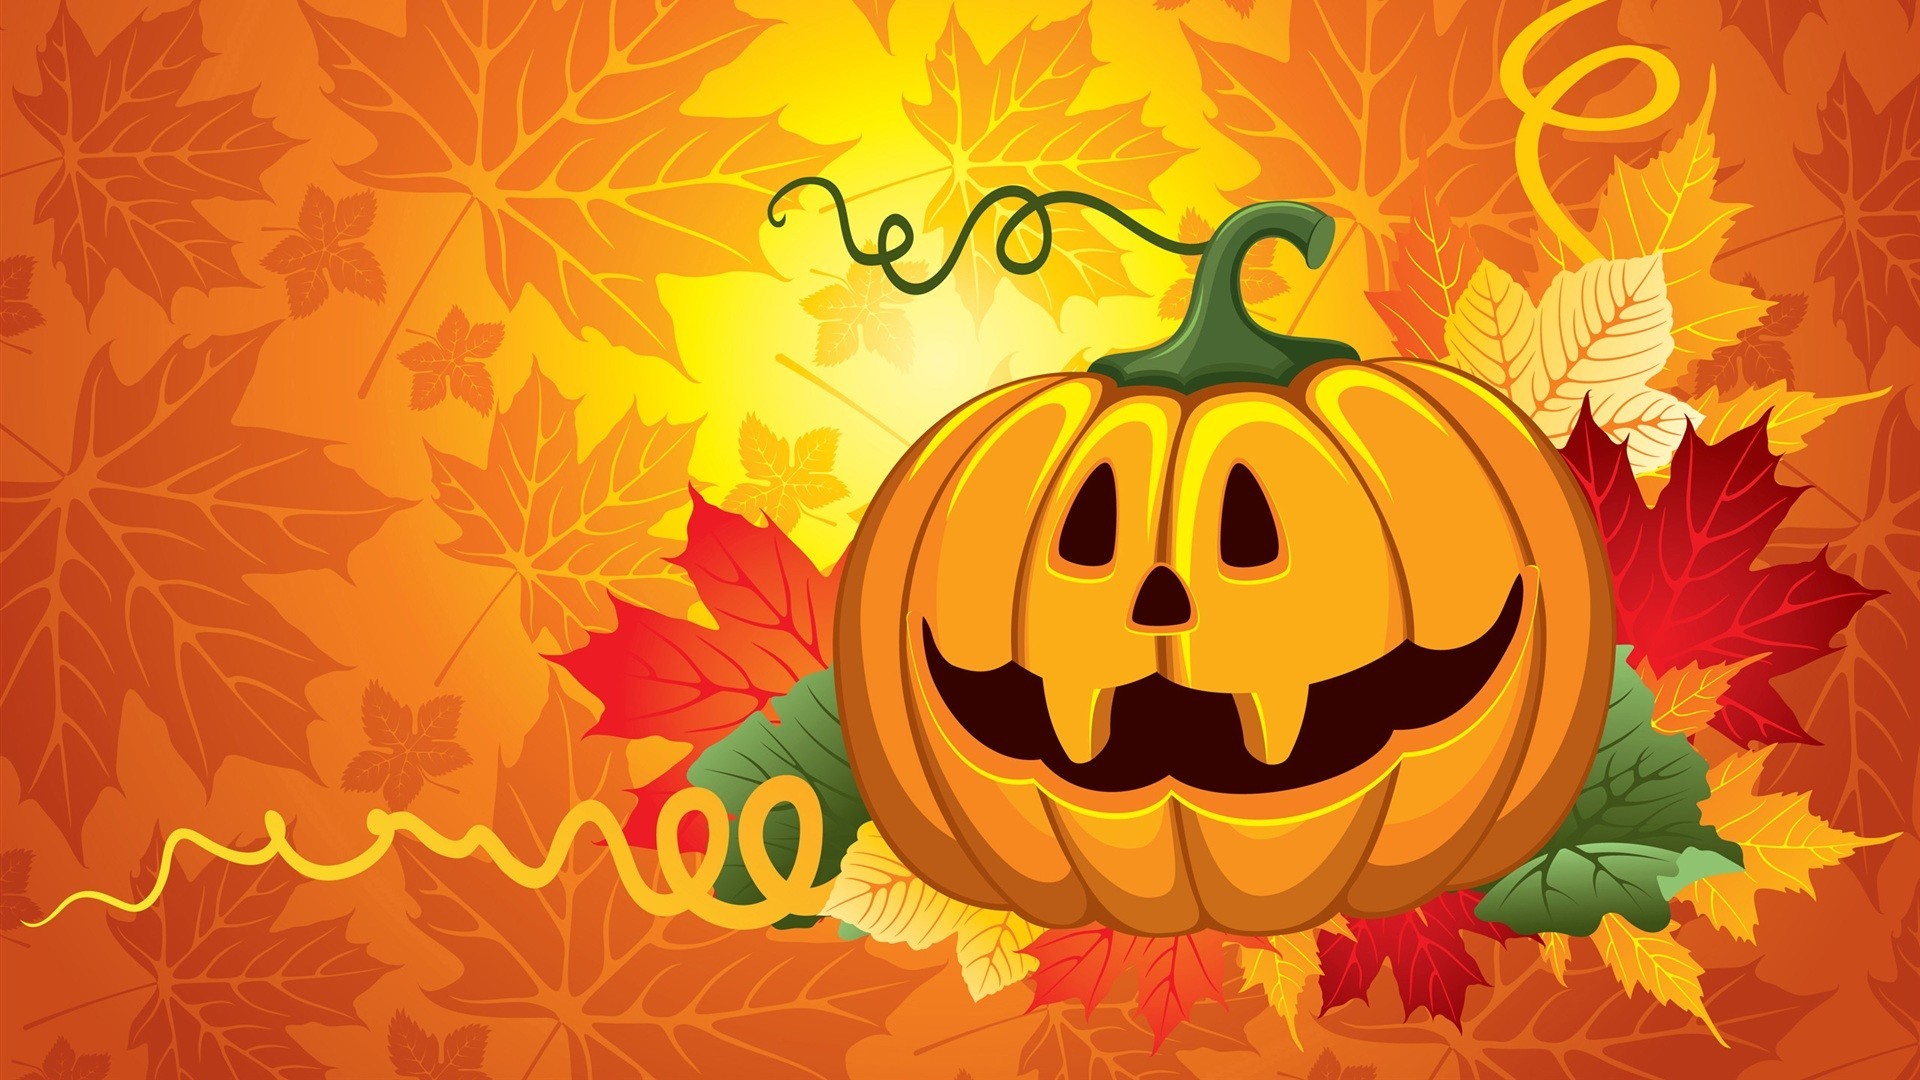 Cute Halloween Wallpaper For Desktop with high-resolution 1920x1080 pixel. You can use this wallpaper for your Windows and Mac OS computers as well as your Android and iPhone smartphones